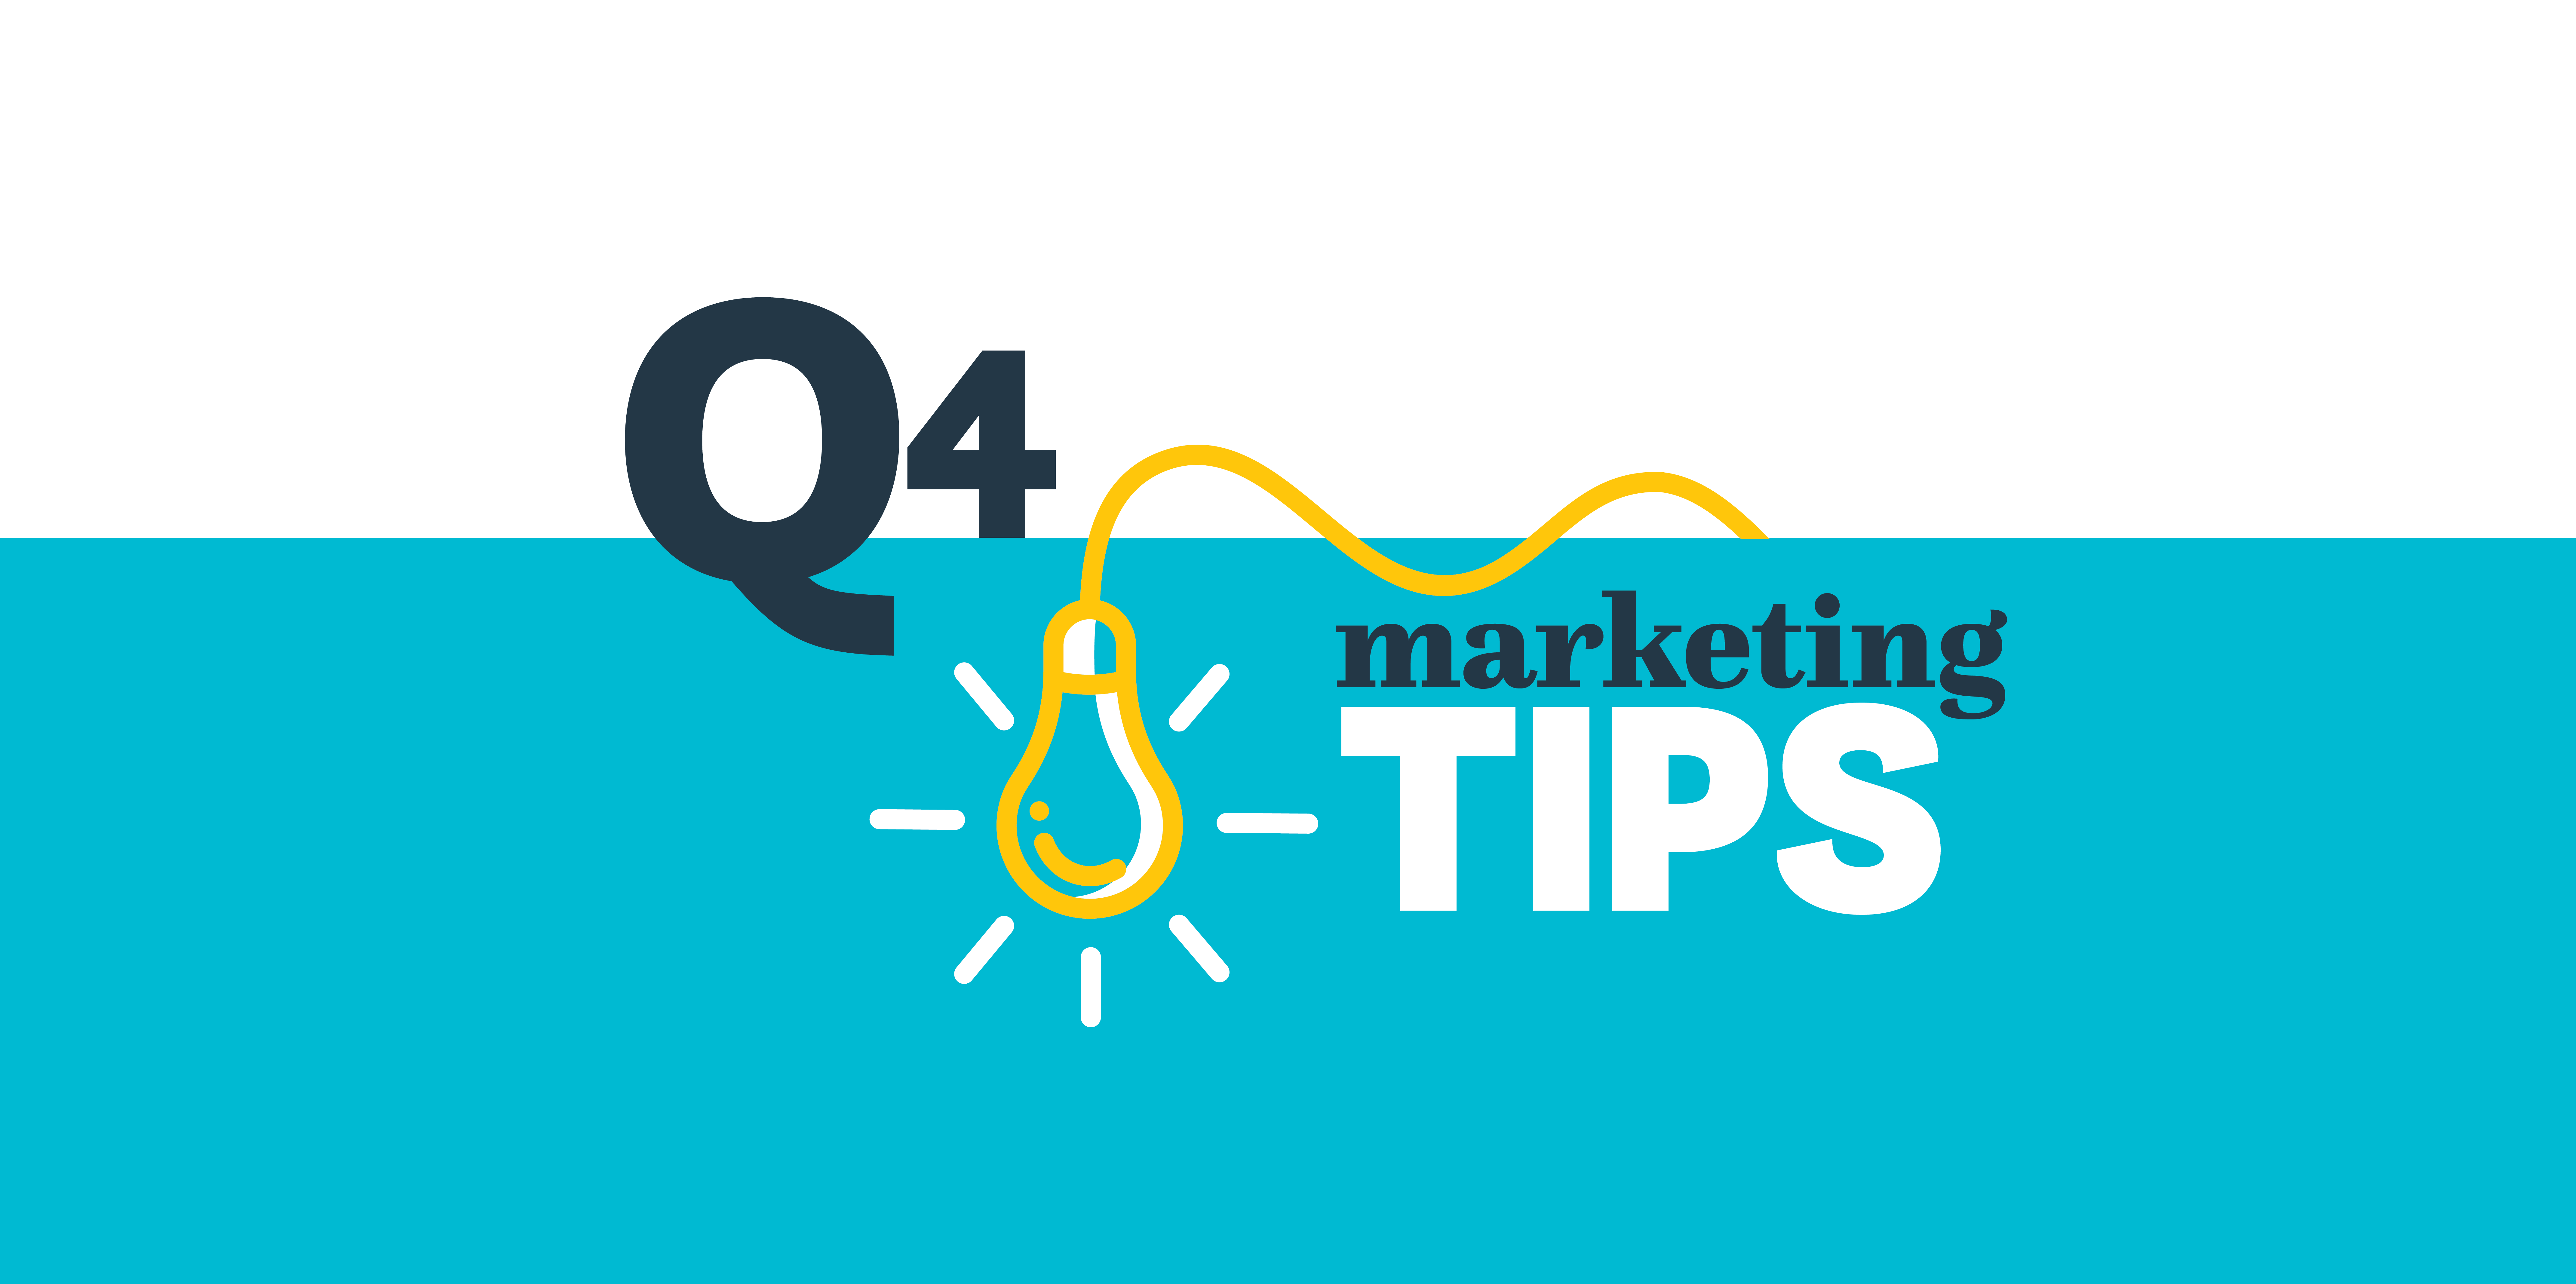 5 Marketing Tips to Make your Q4 Easier